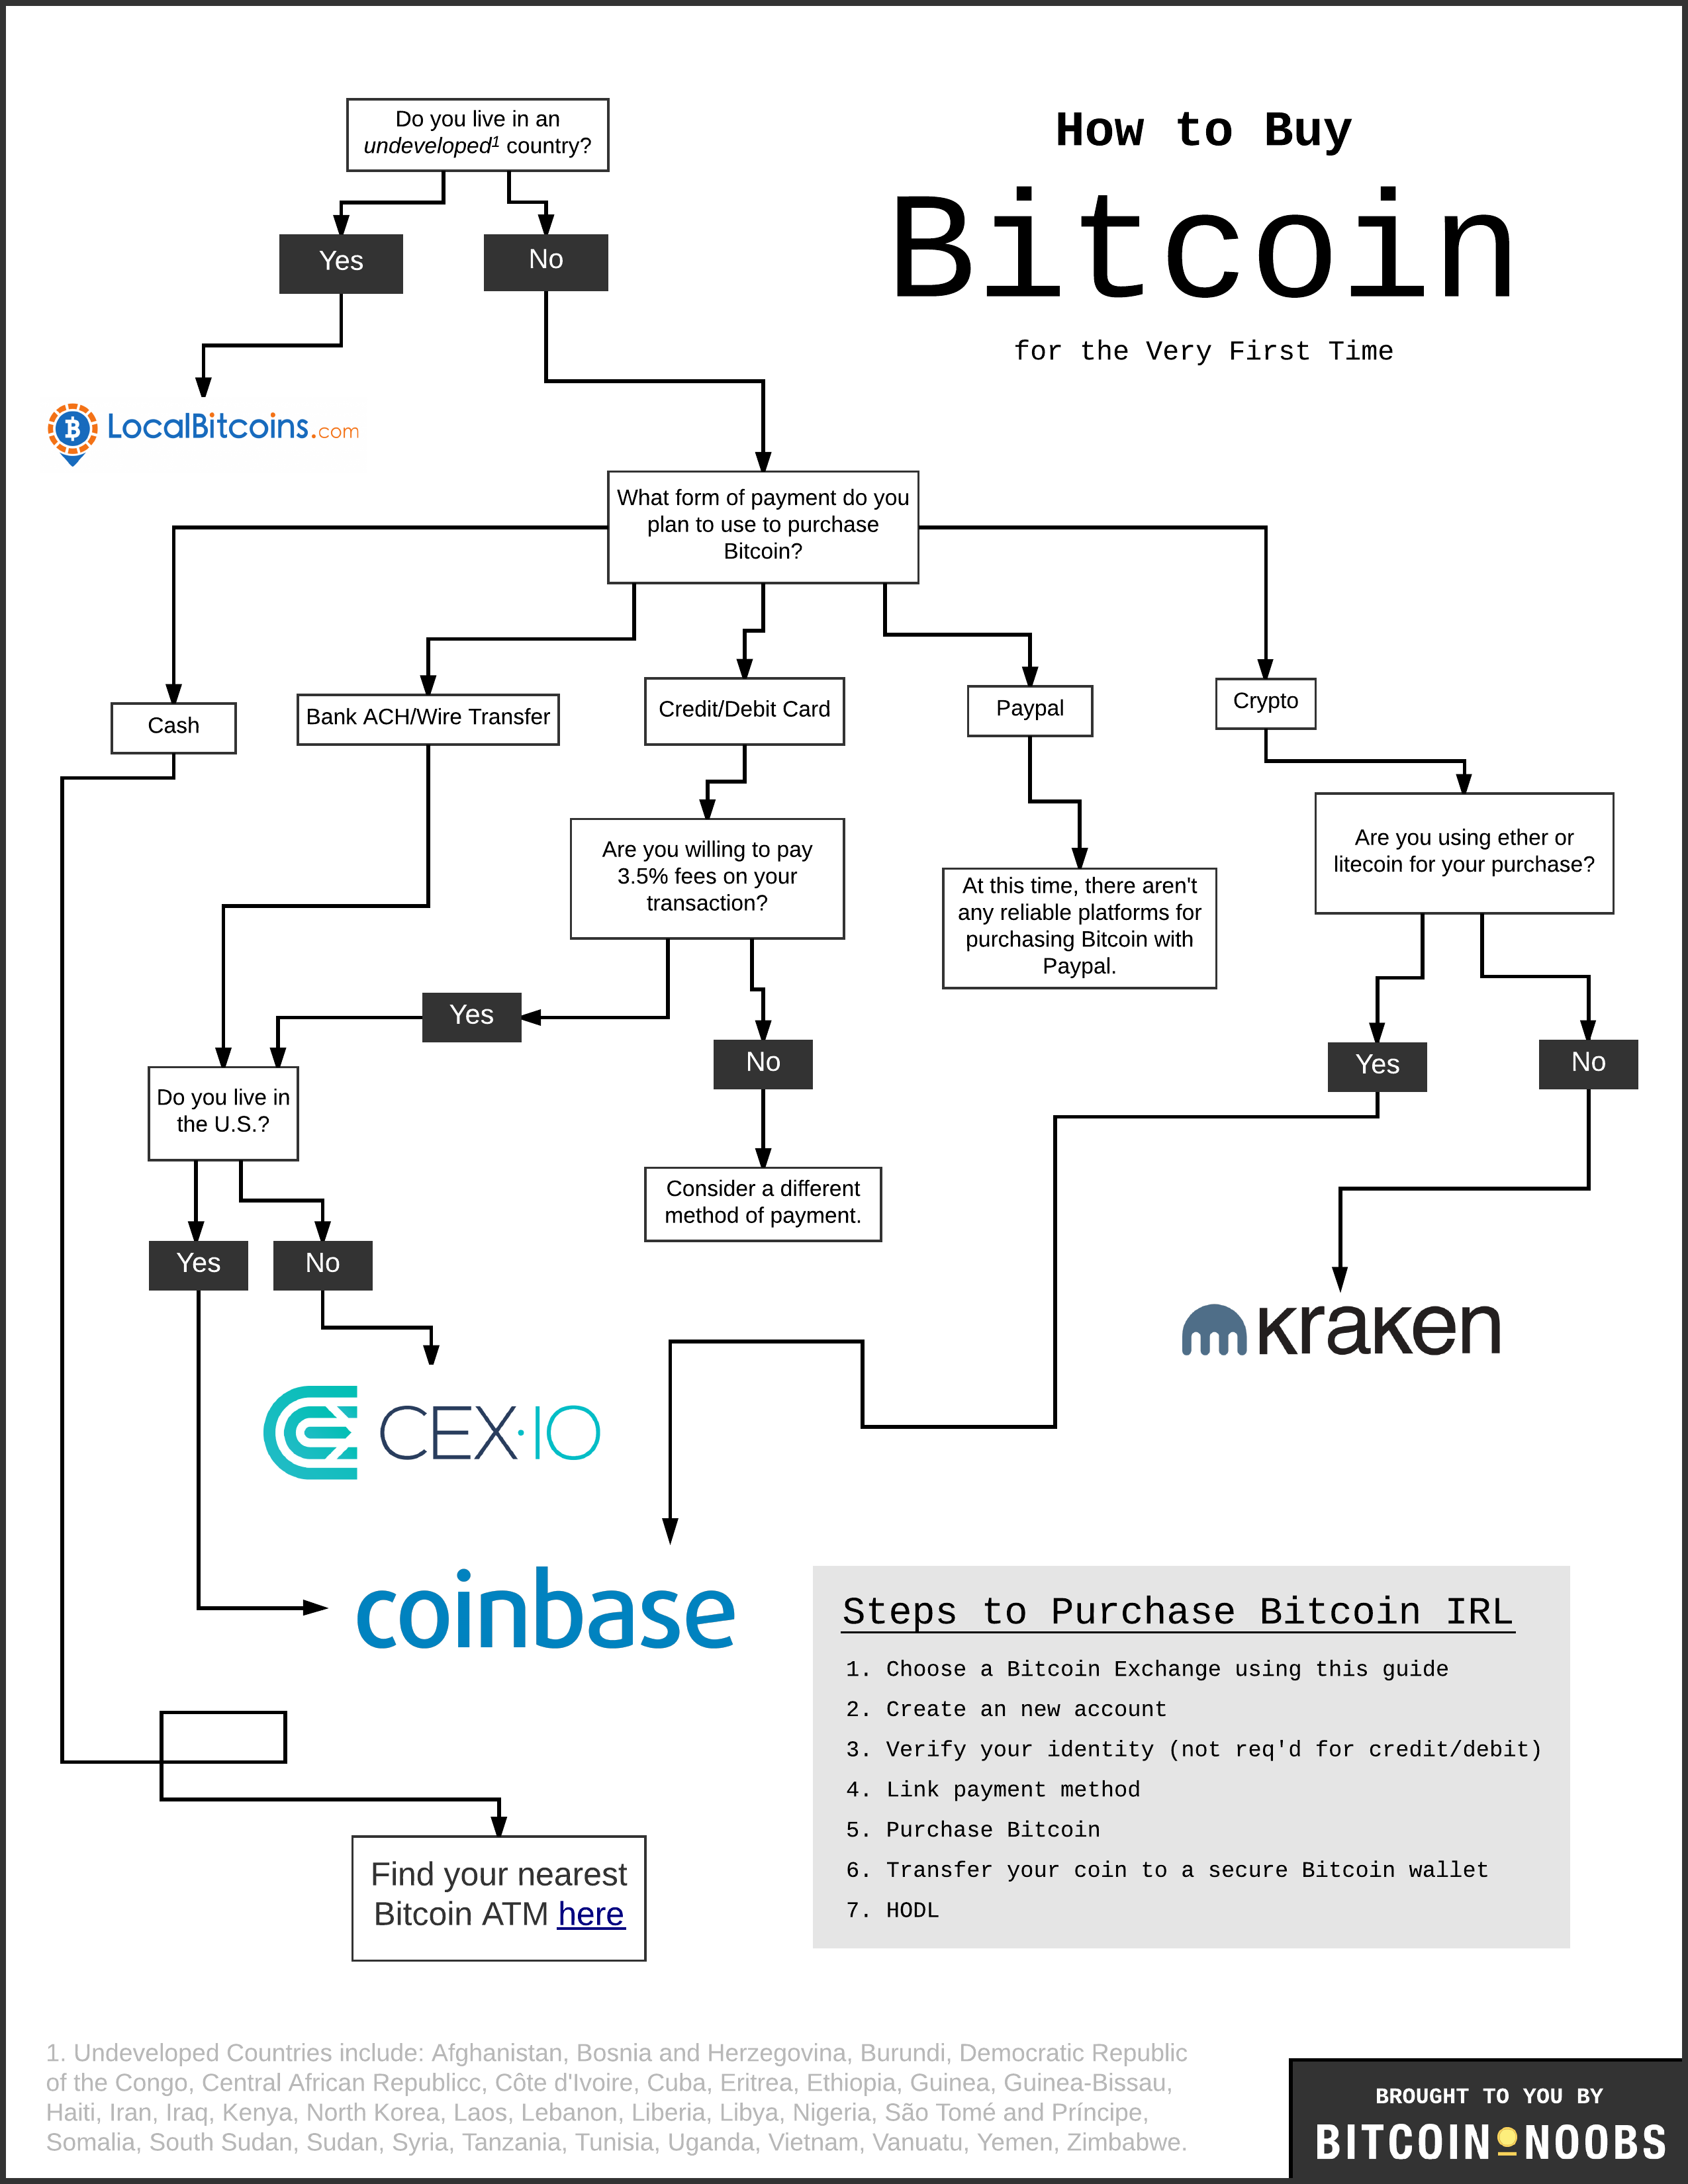 how to buy bitcoins infographic